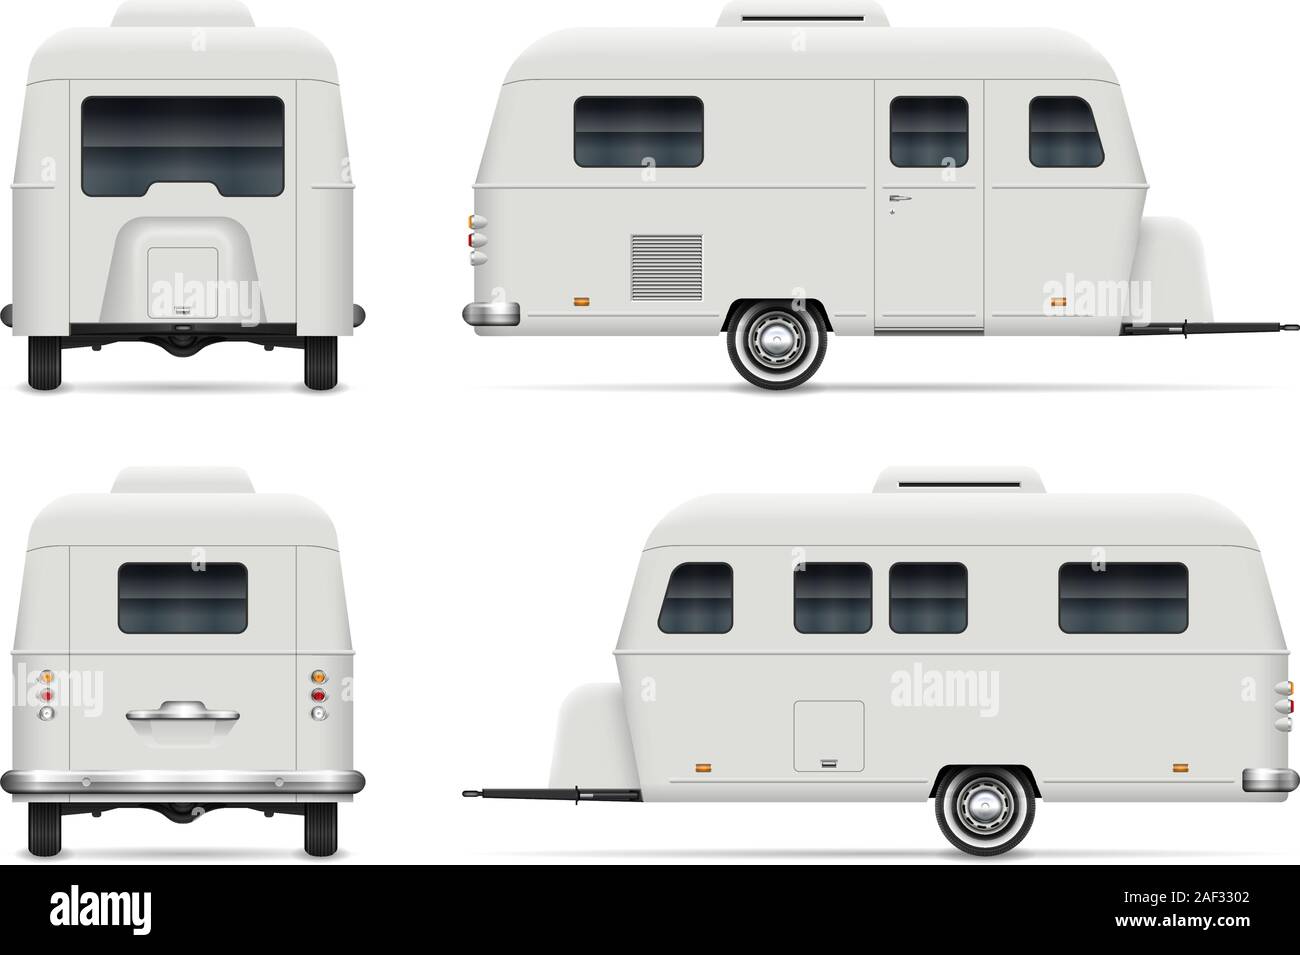 Travel trailer vector mockup on white background for vehicle branding, corporate identity. Easy editing and recolor. Stock Vector